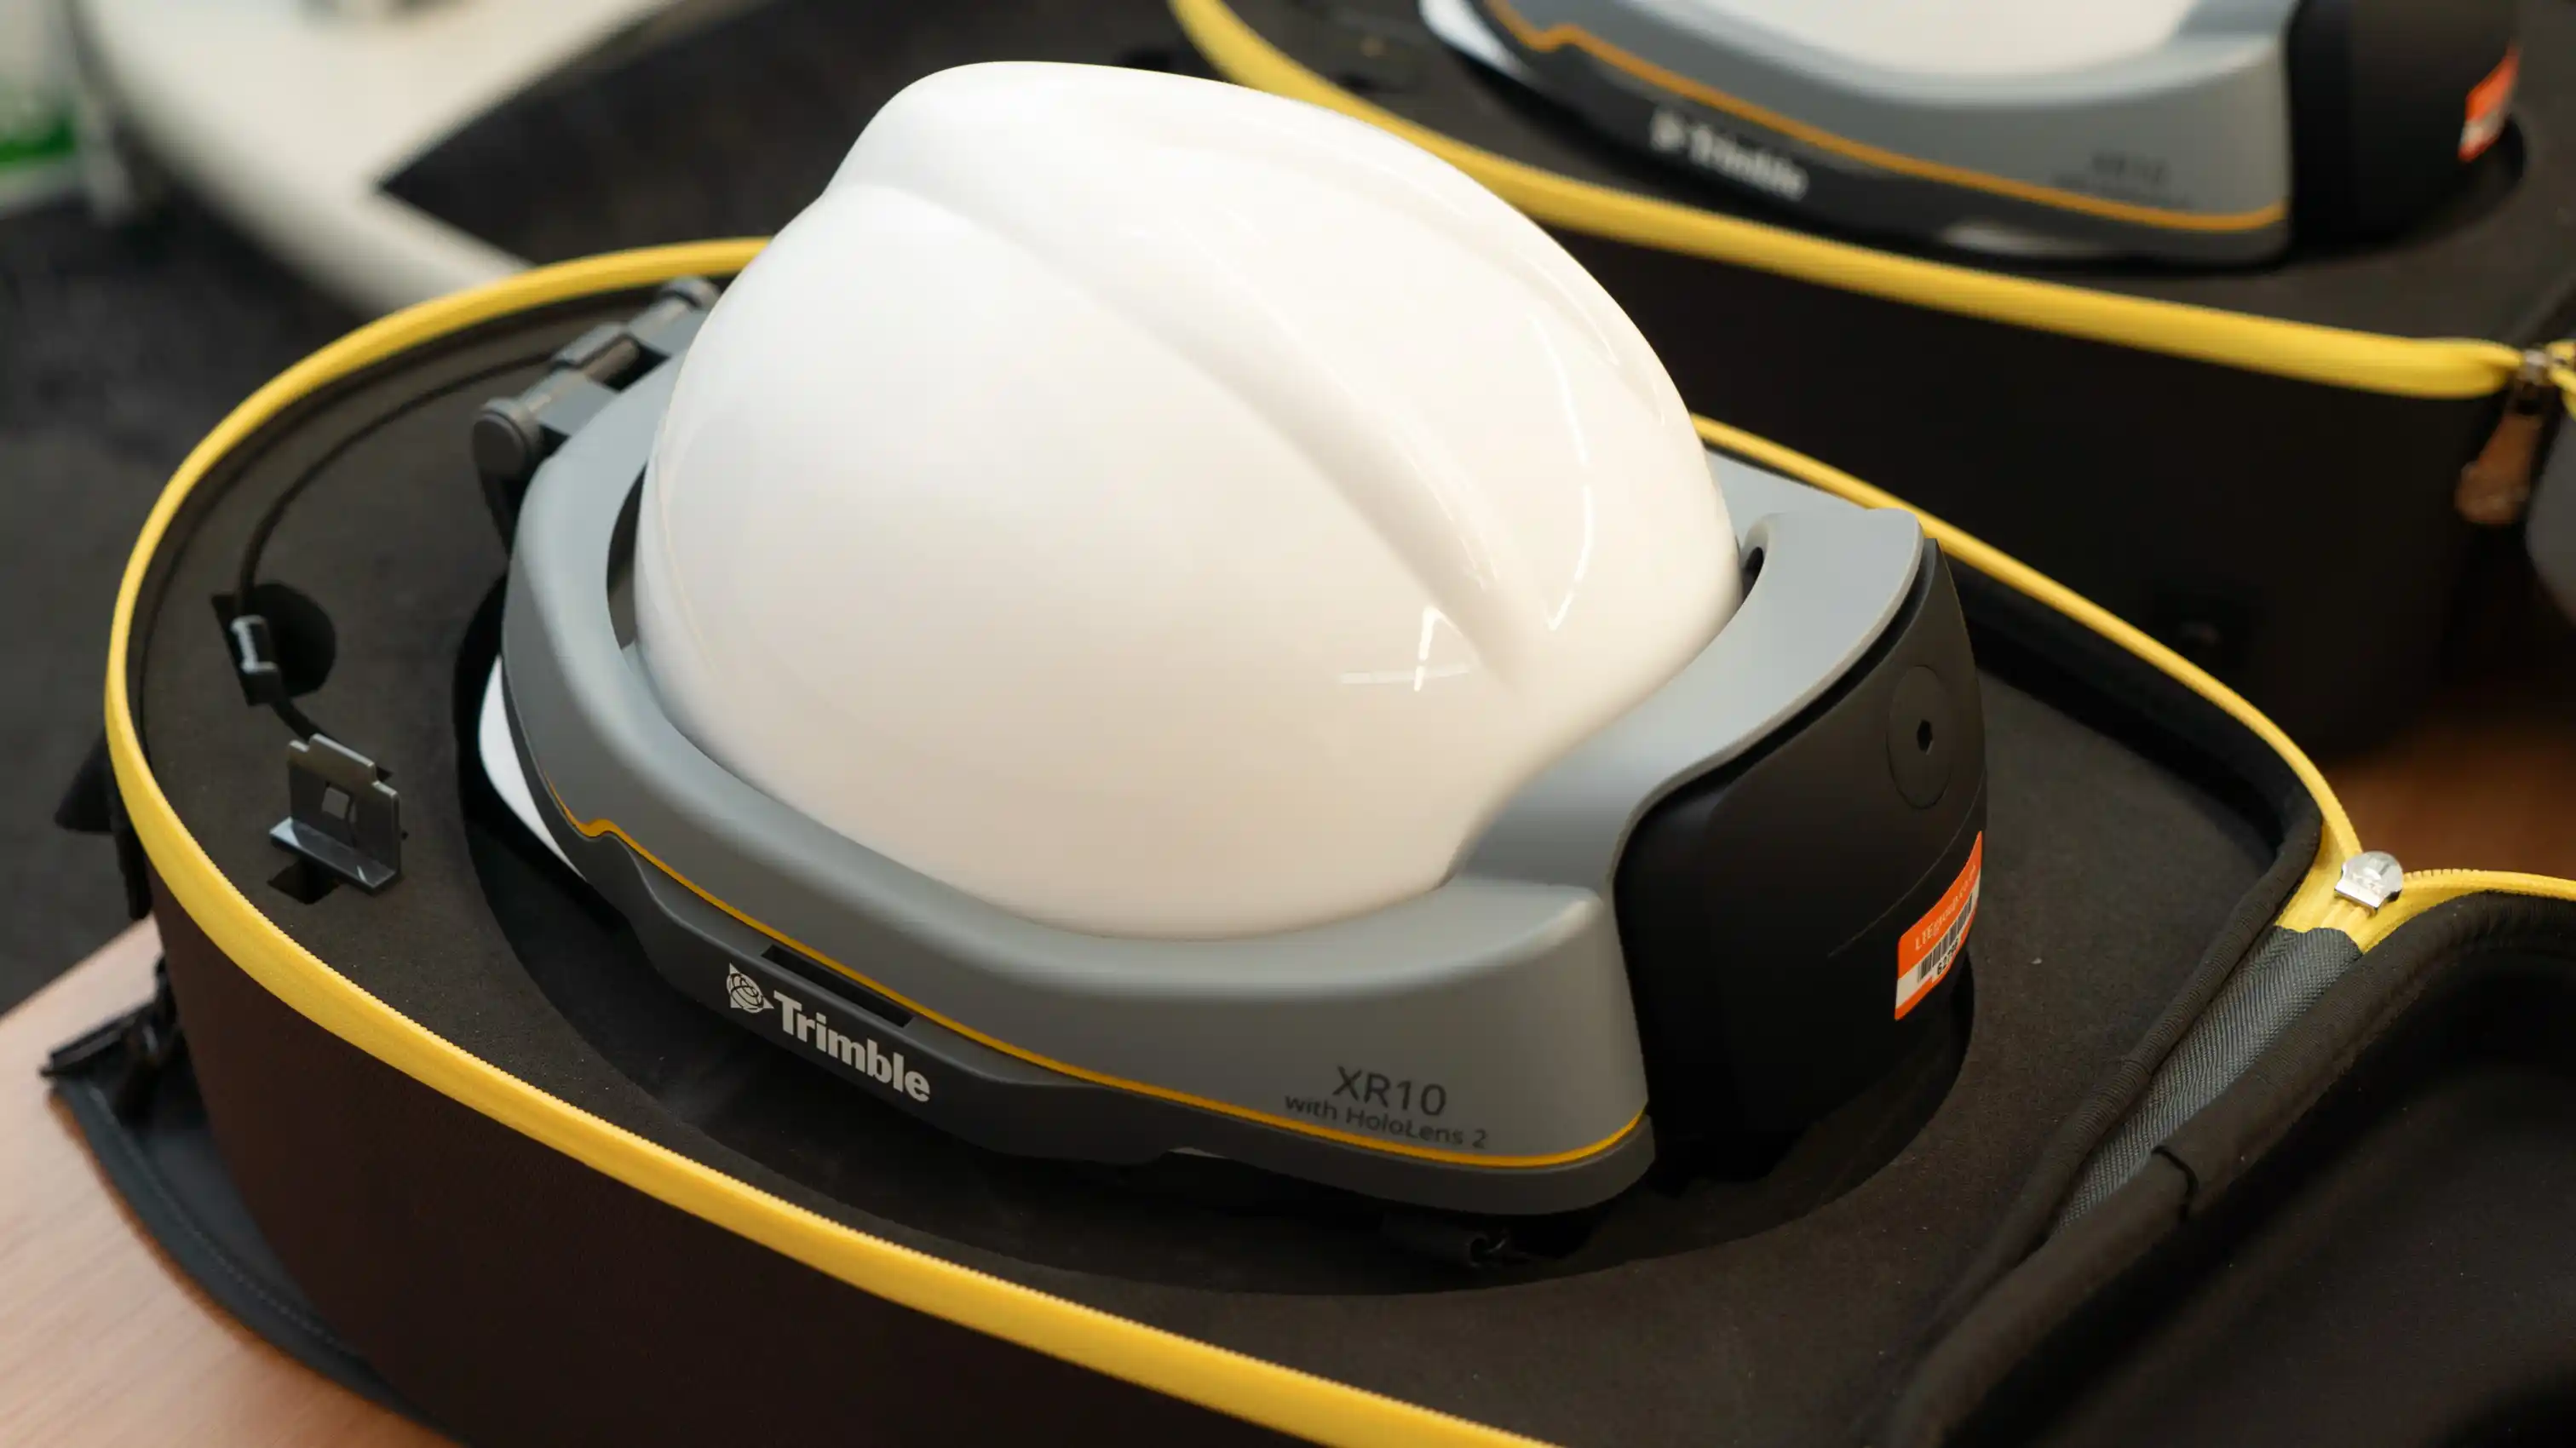 Hard hat with integrated augmented reality headset